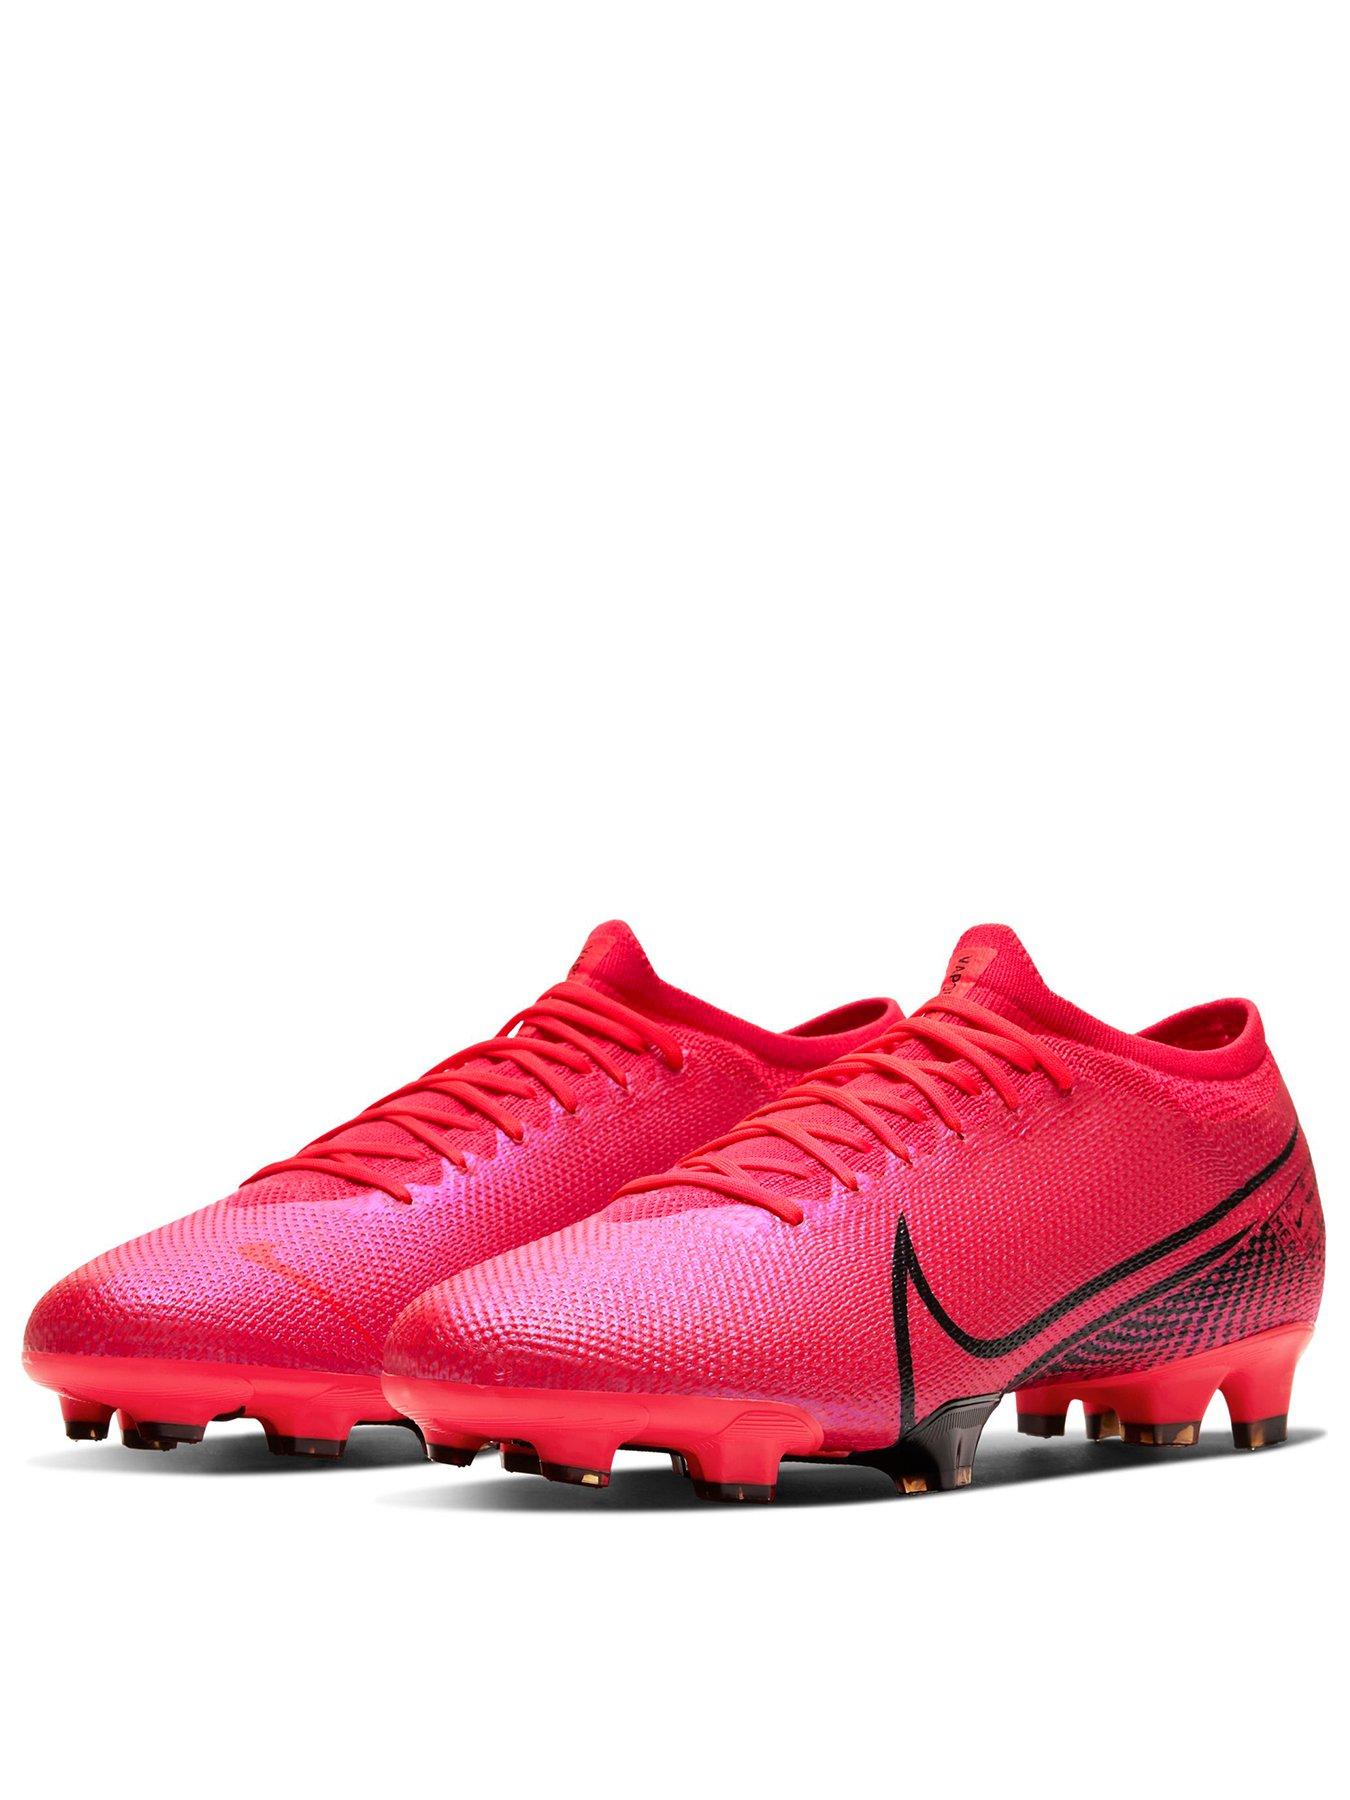 nike mercurial football boots red